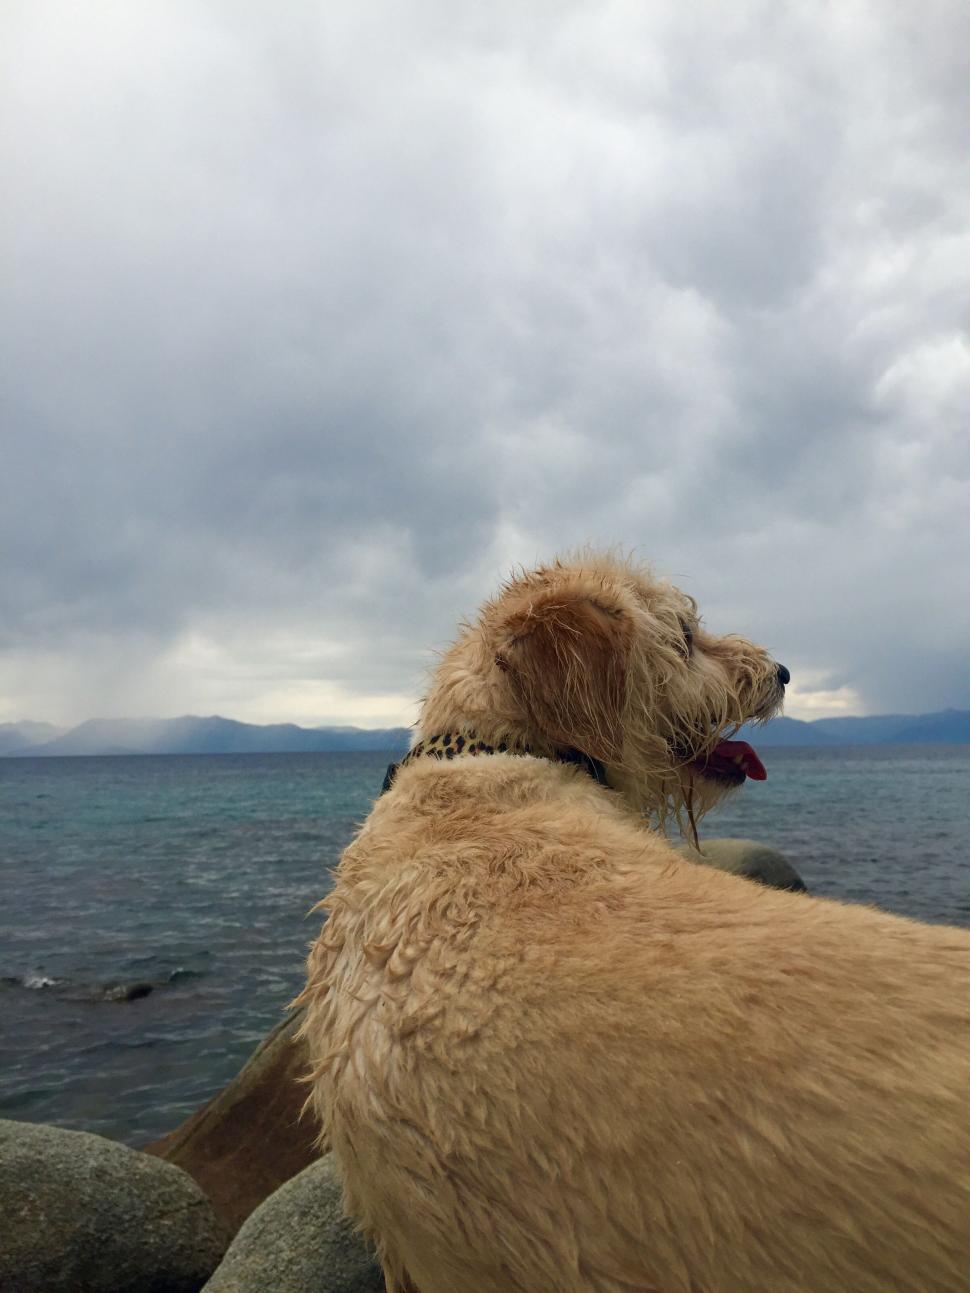 Free Image of Dog Sitting on Top of a Rock by the Ocean 